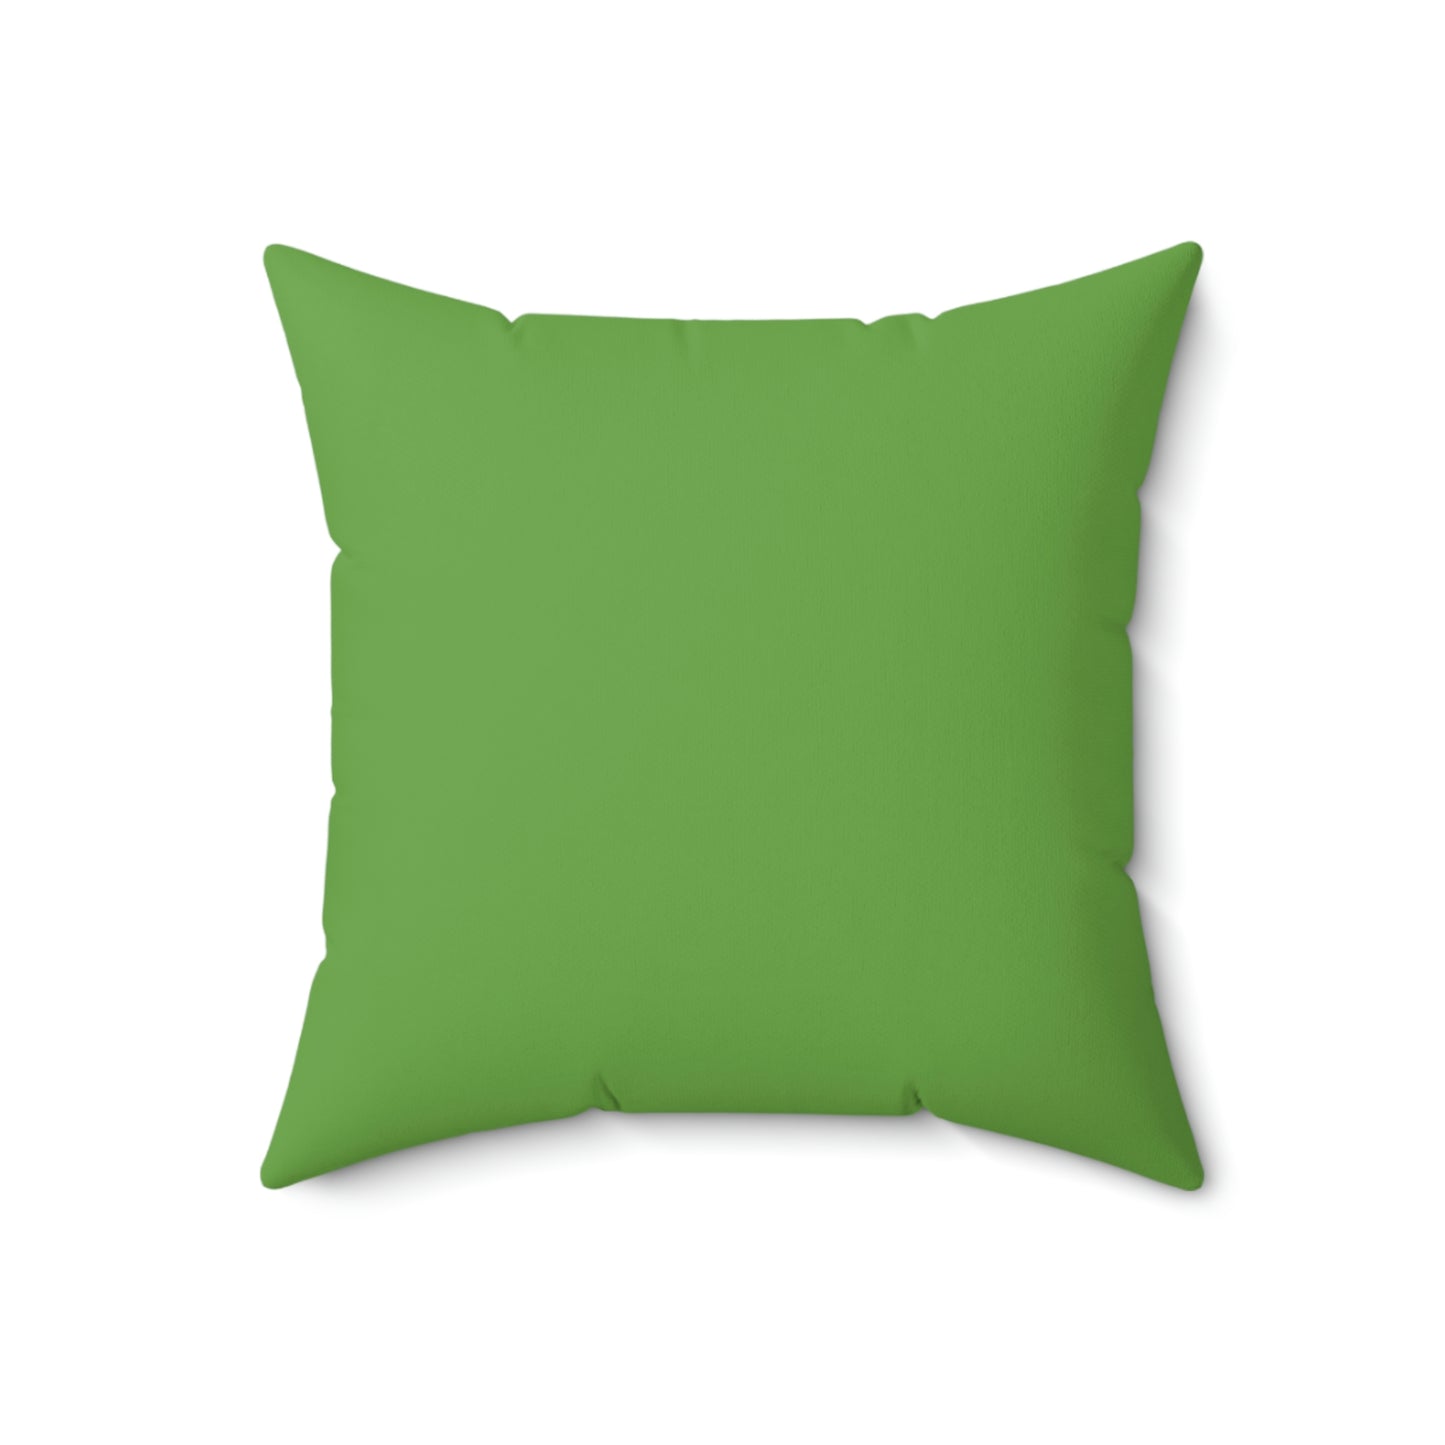 Spun Polyester Square Pillow Case "Cassettes on Green”